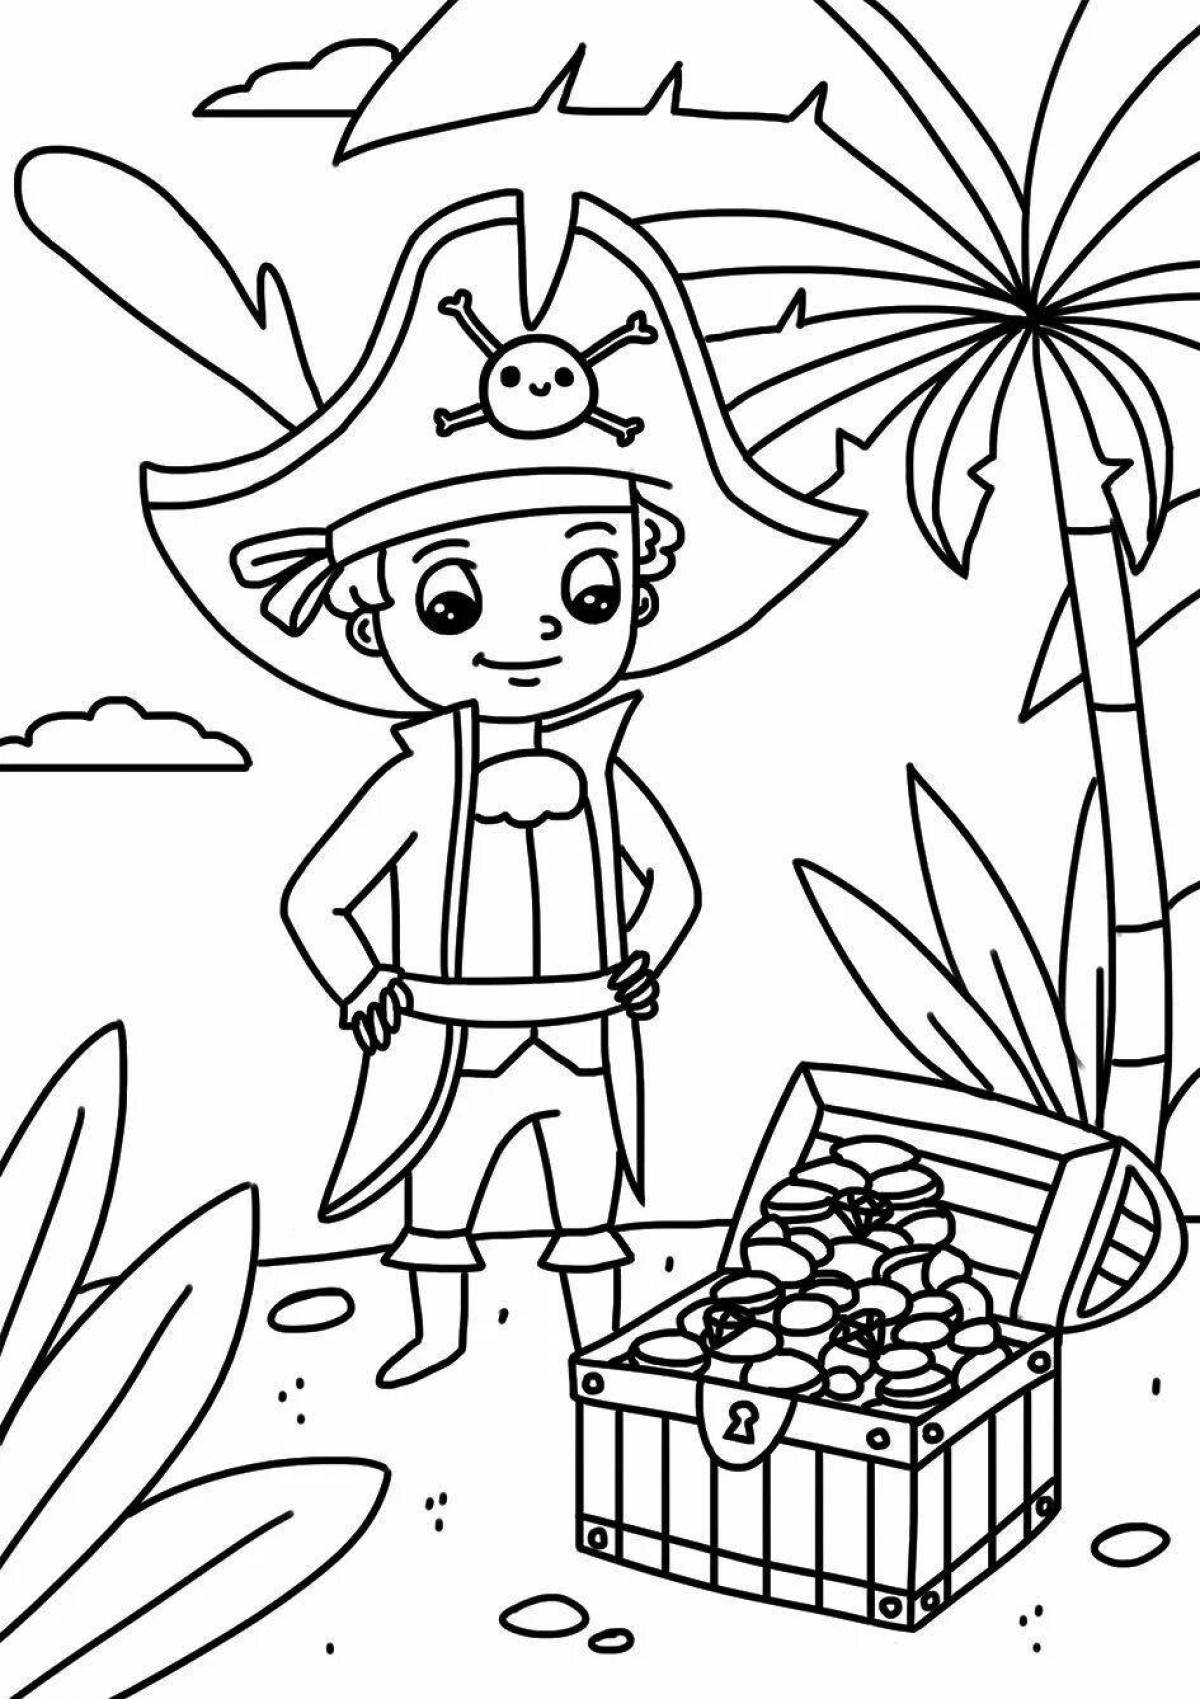 Playful pirate coloring book for kids